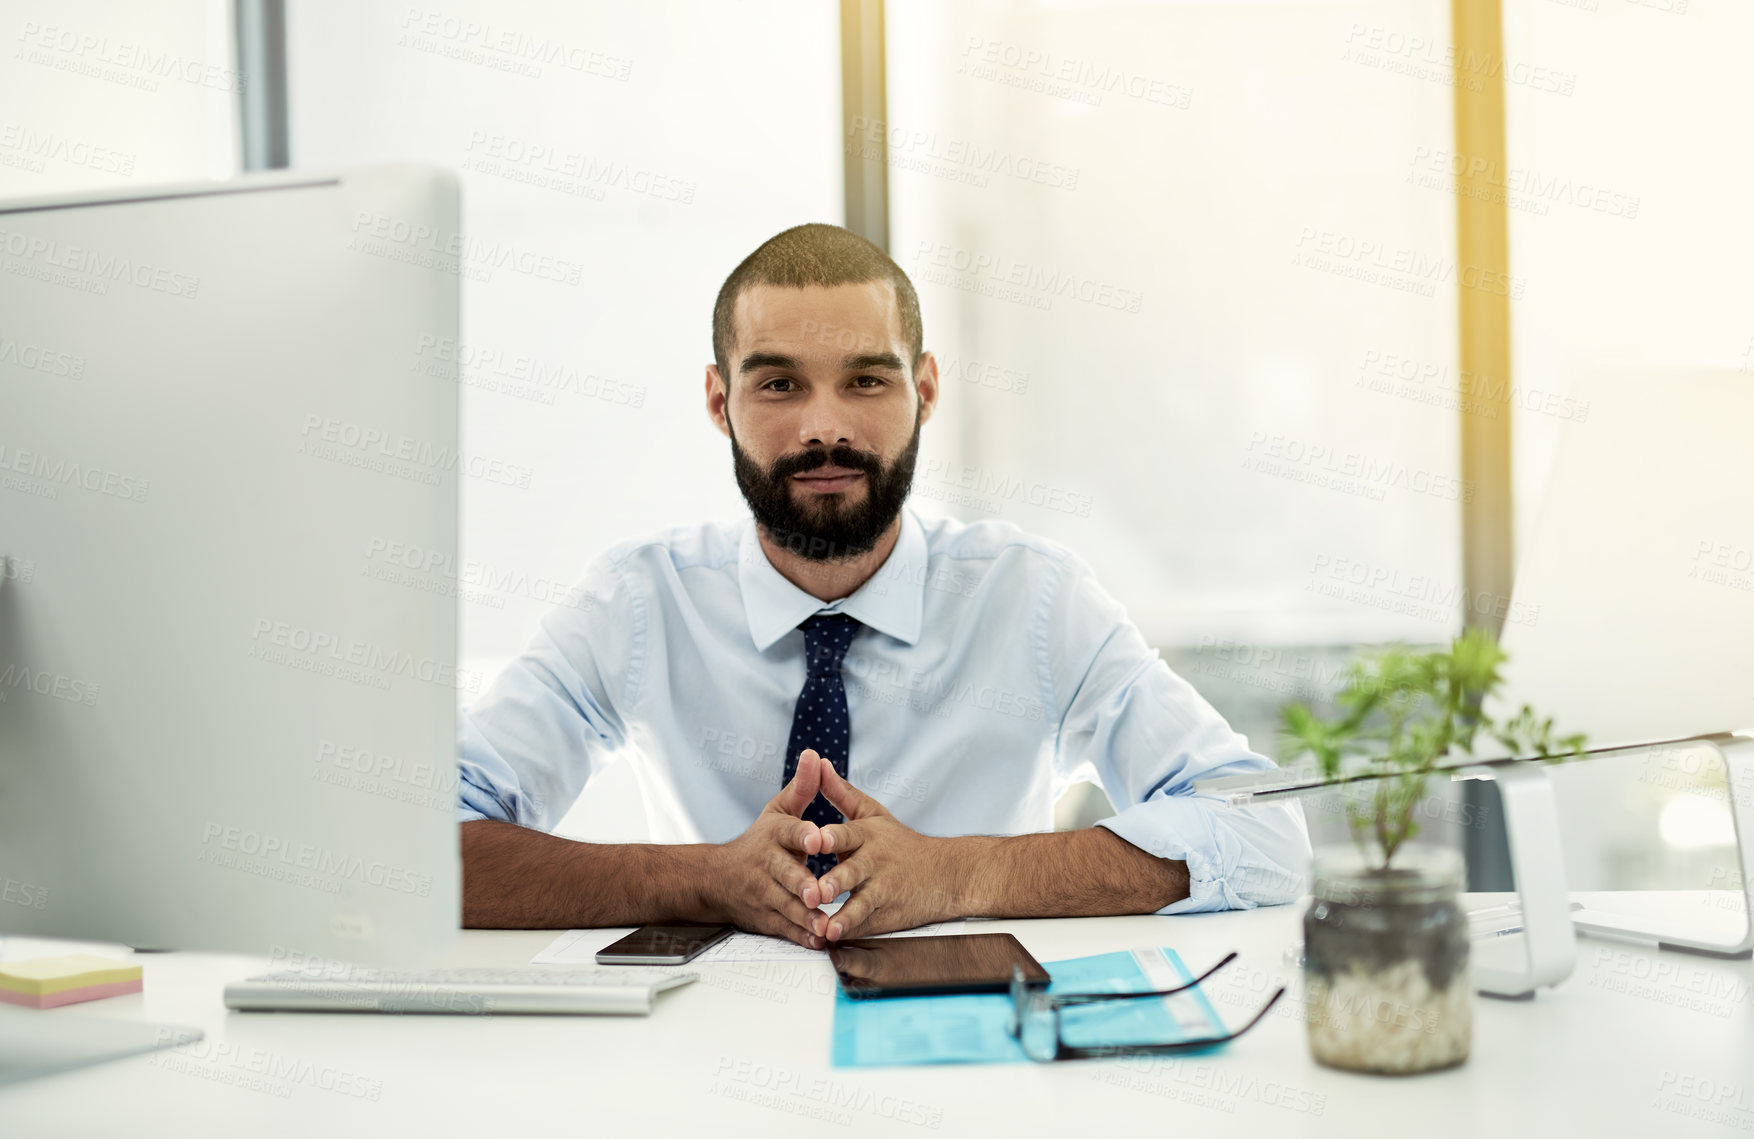 Buy stock photo Portrait of a young businessman working at his desk in an office